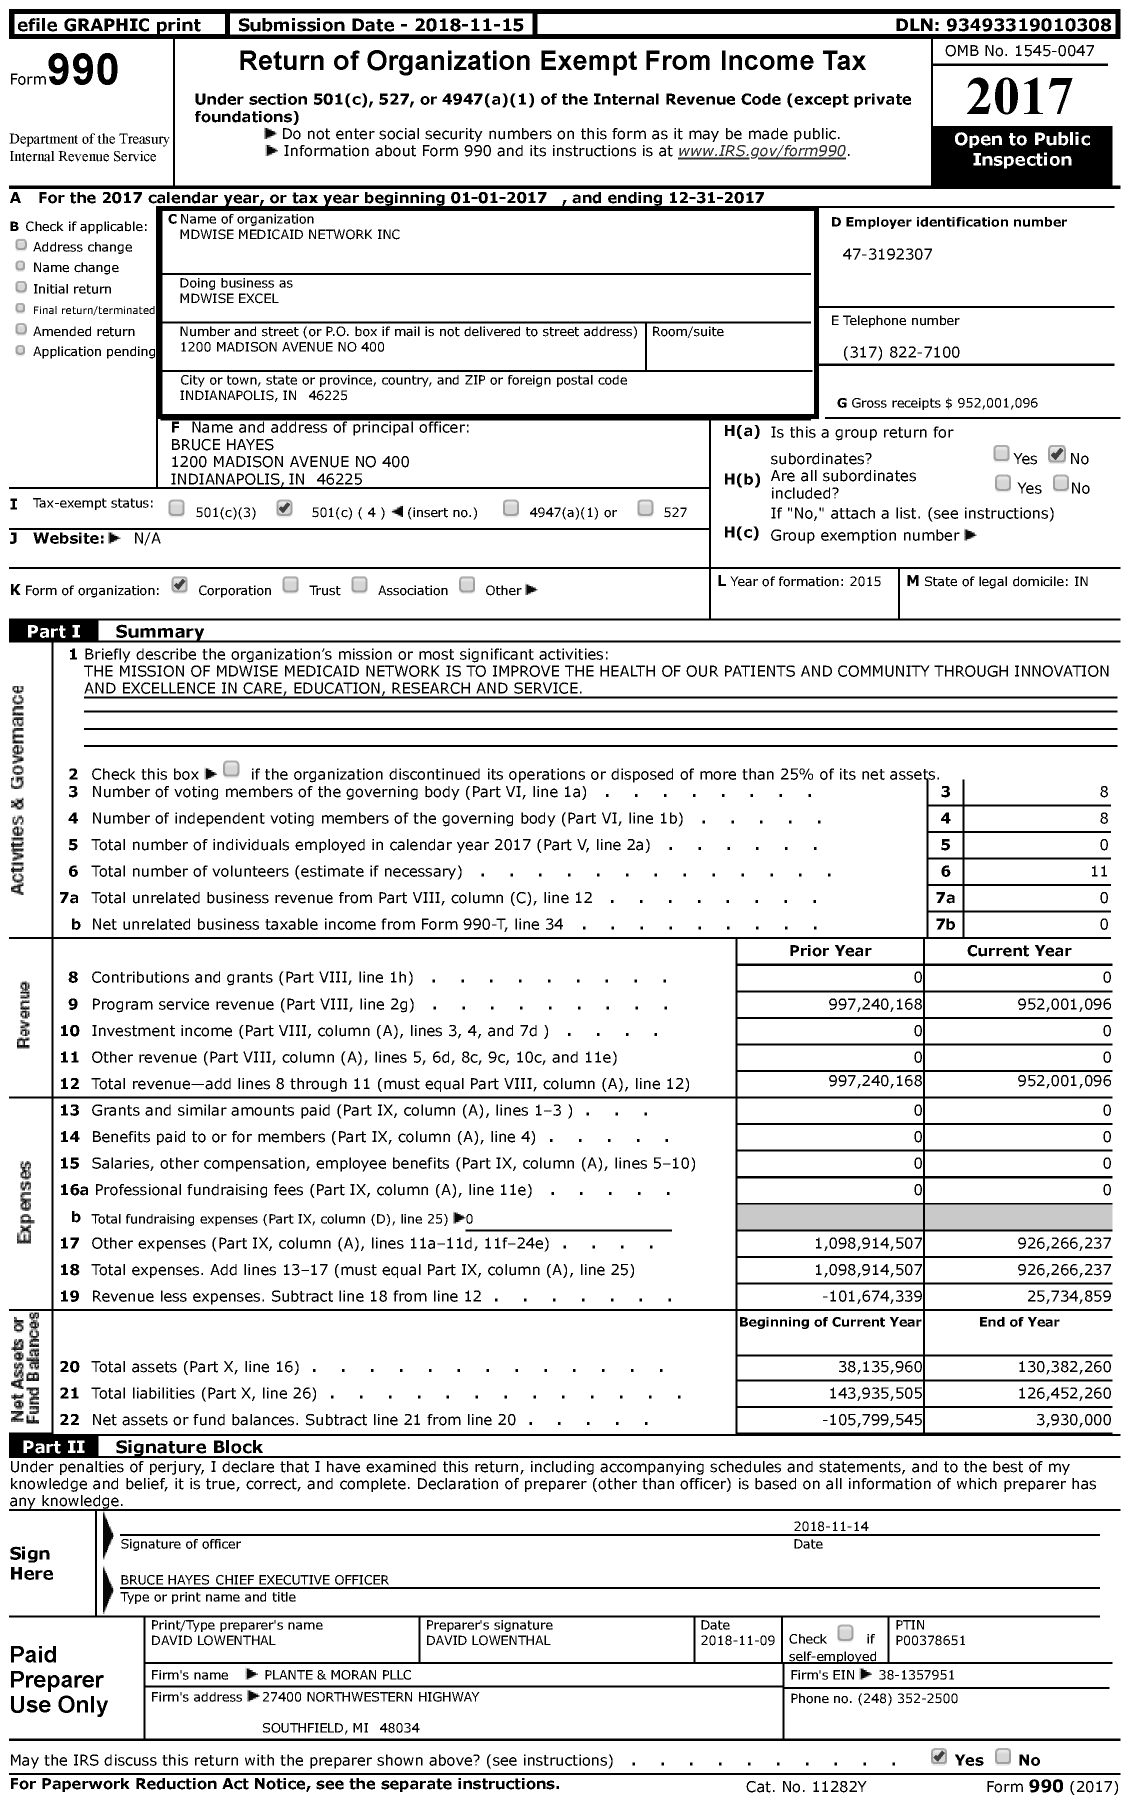 Image of first page of 2017 Form 990 for MDWISE Excel